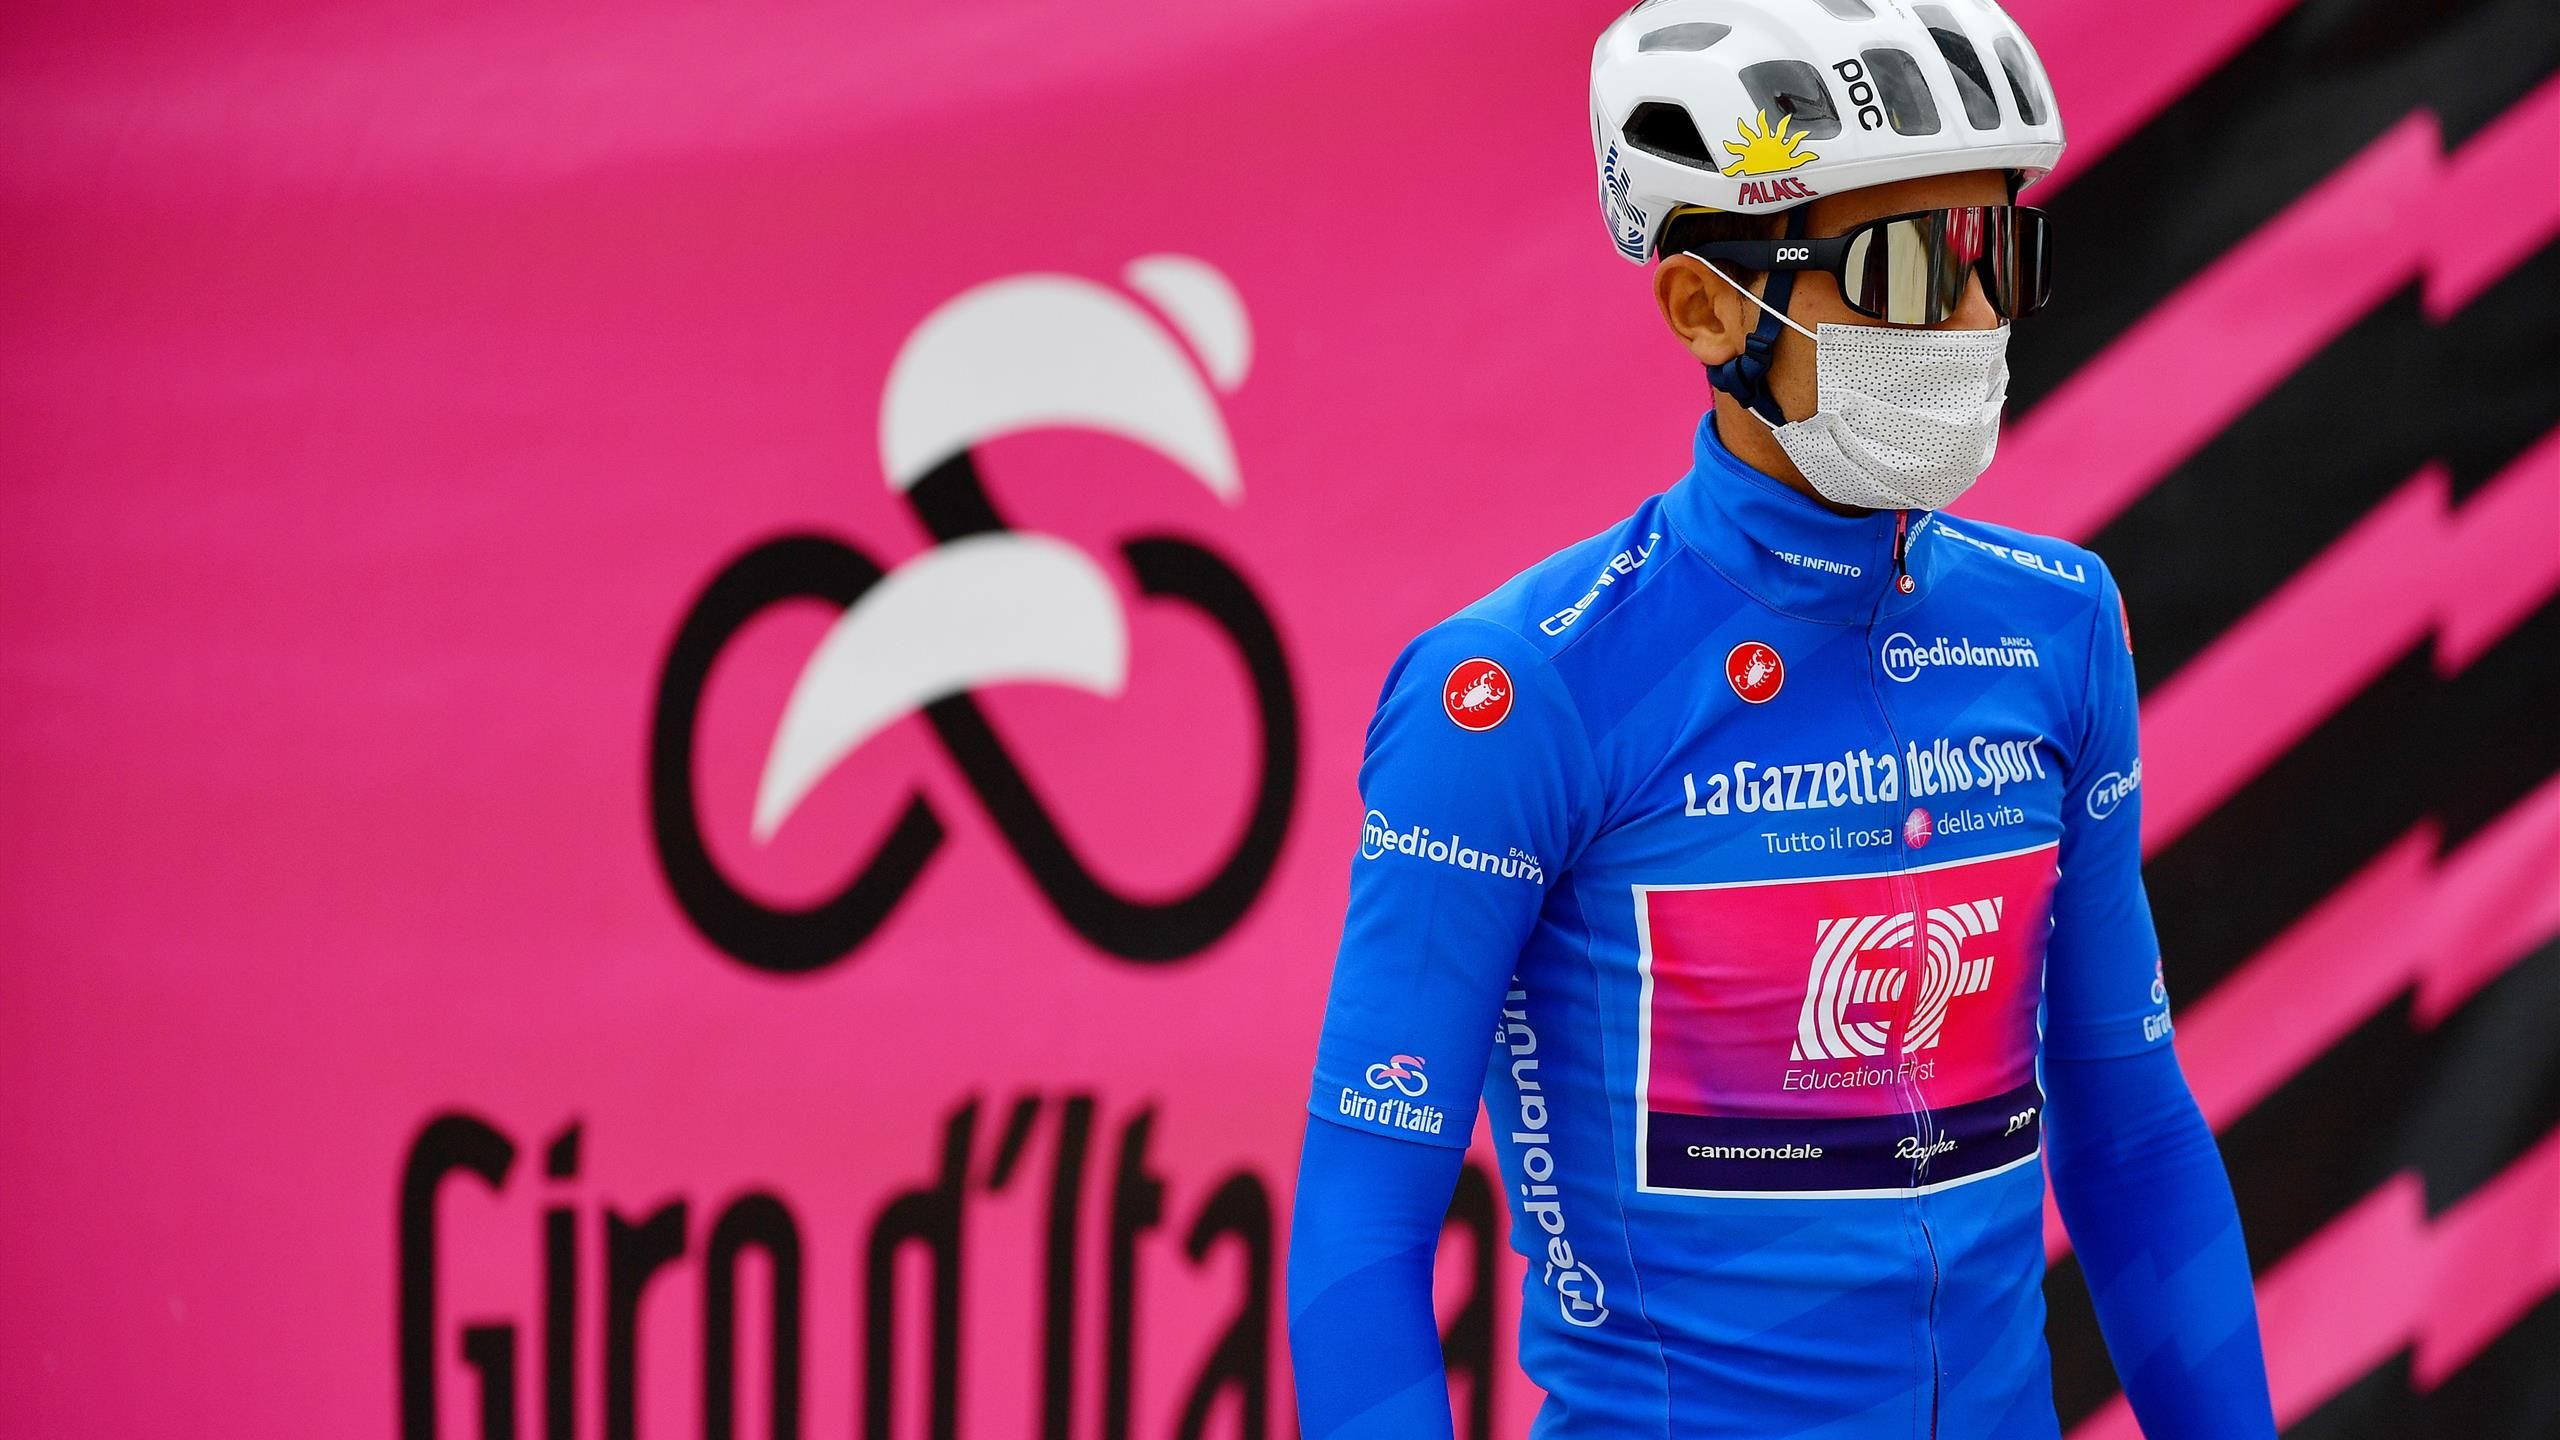 Giro dItalia 2020 - Exclusive Proposal from EF Pro Cycling calls for Giro to be stopped early